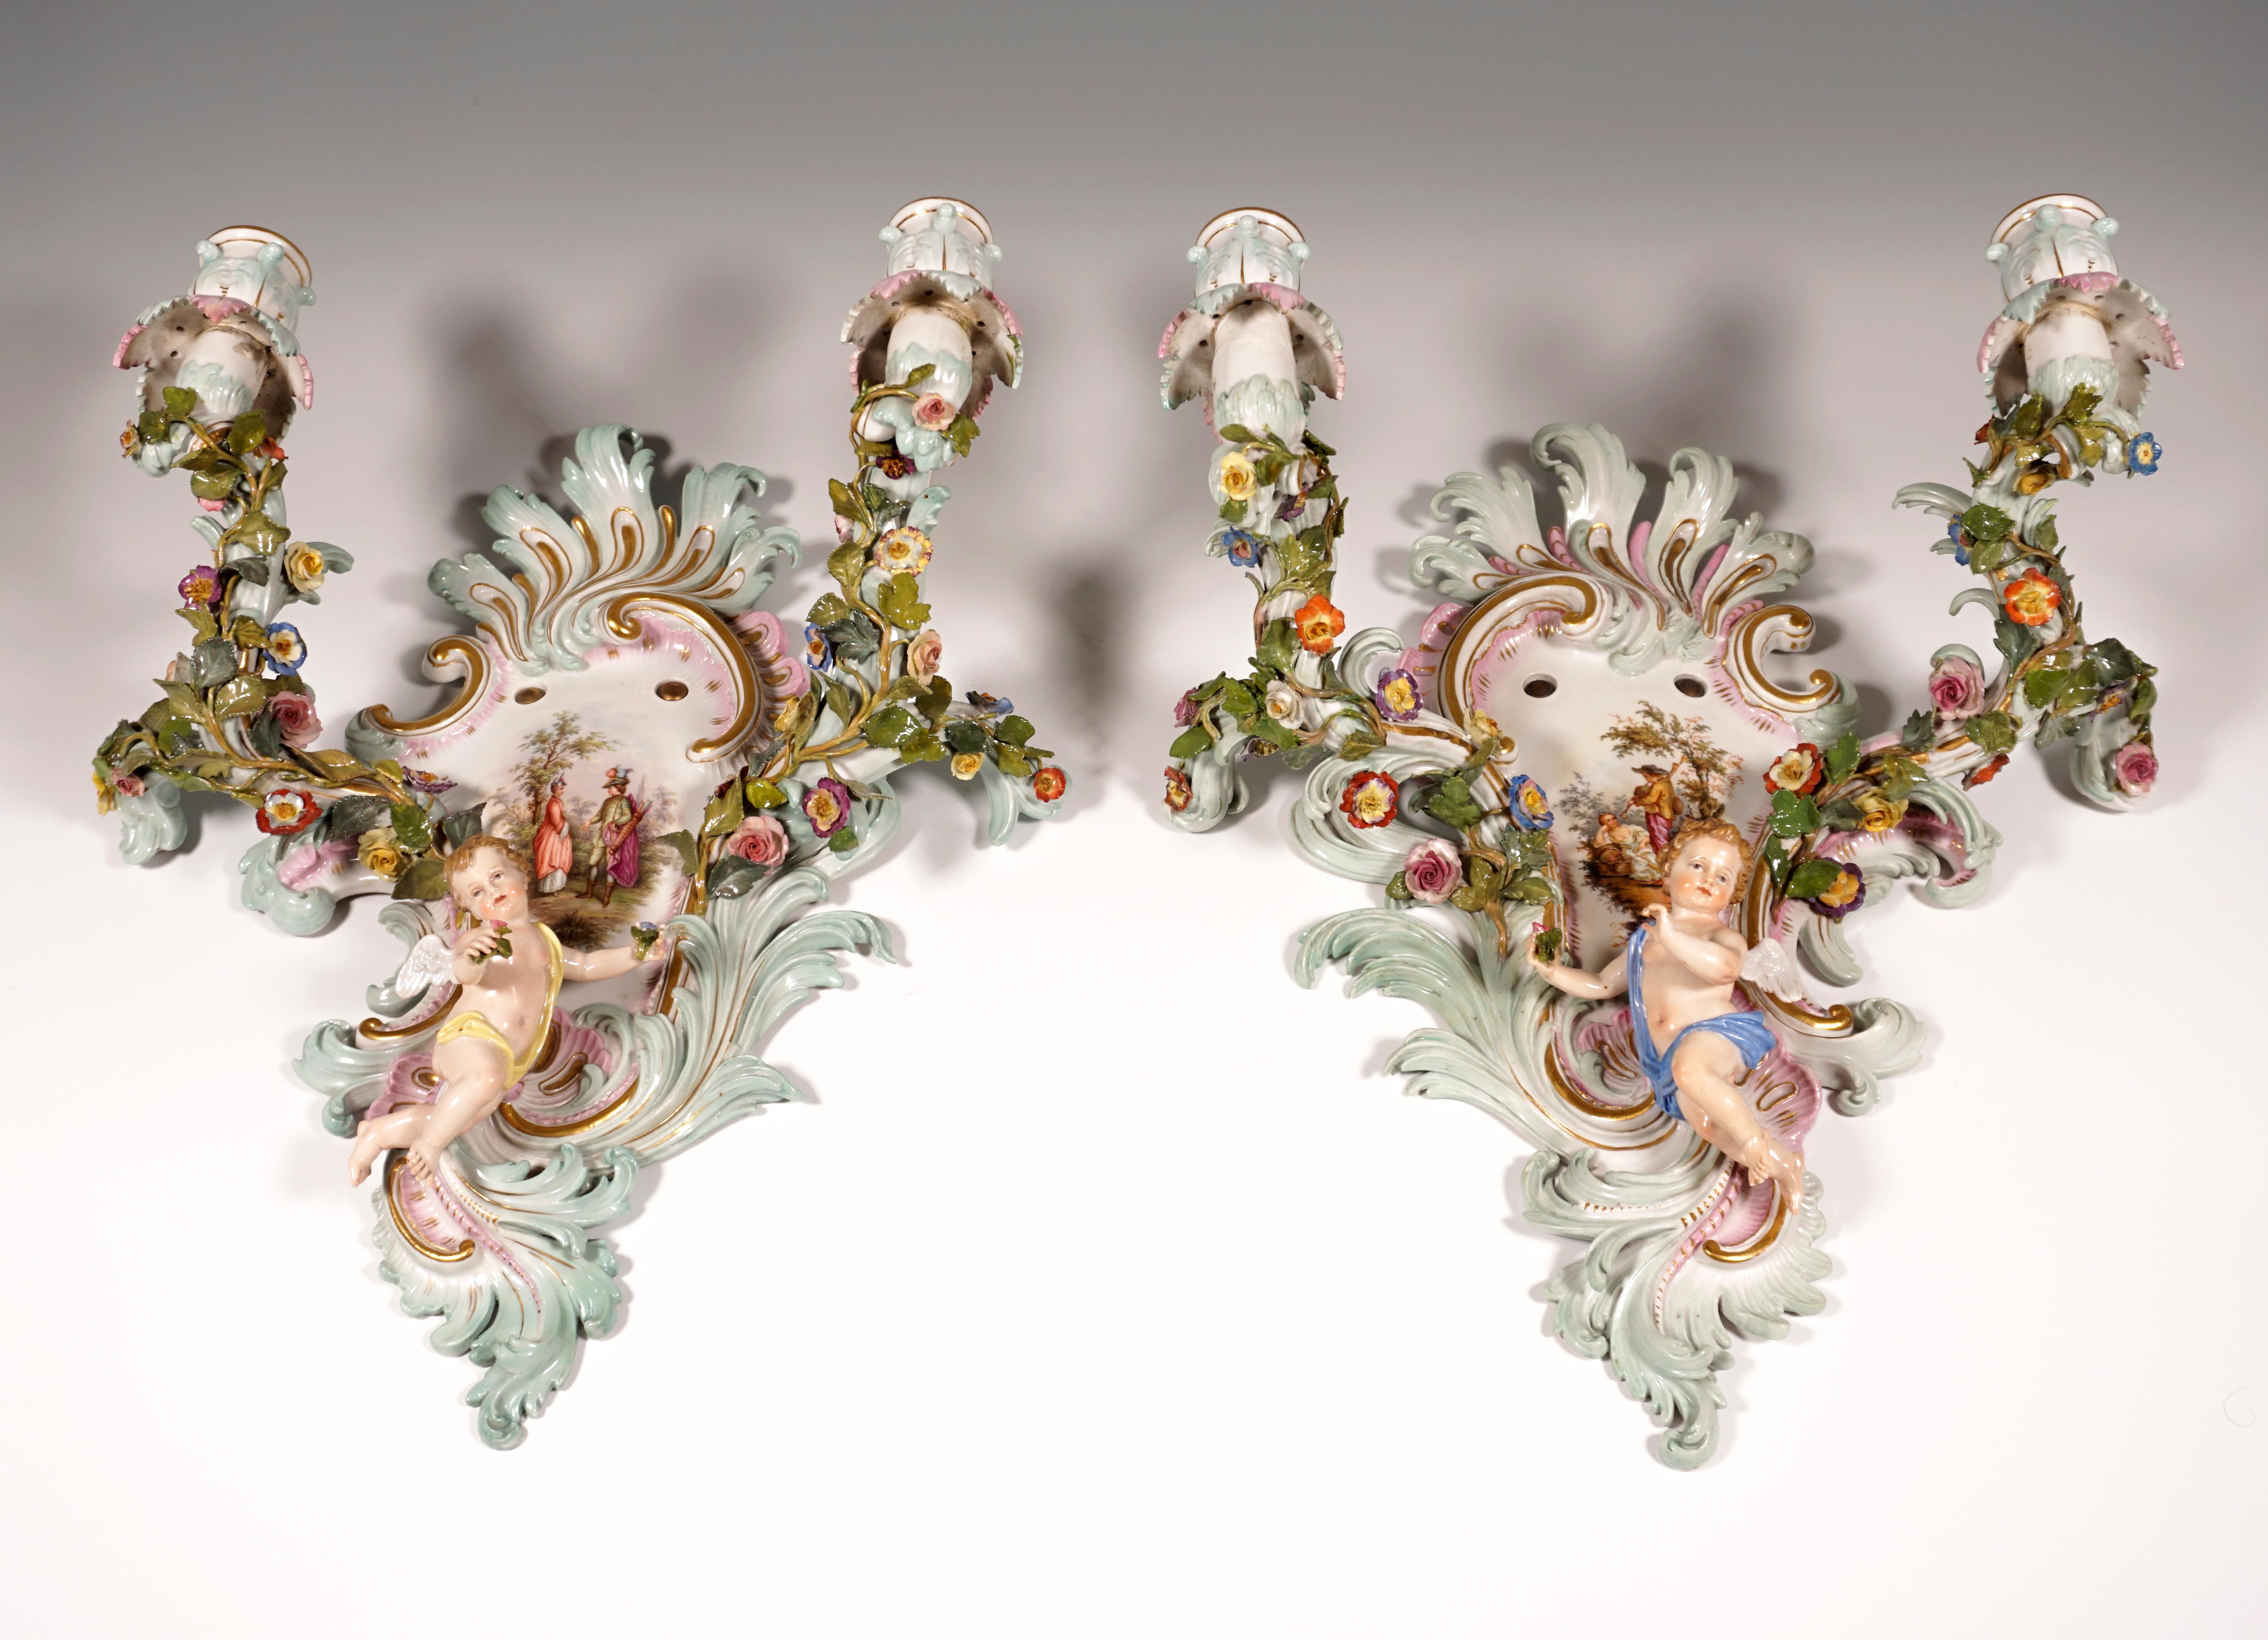 Pair of two-flame wall appliqués in the form of colored and gold-decorated rocaille shields, each with two candlestick arms richly covered with flowers and leaf tendrils, as well as one floating, winged cupid boy holding flowers in his hands, in the